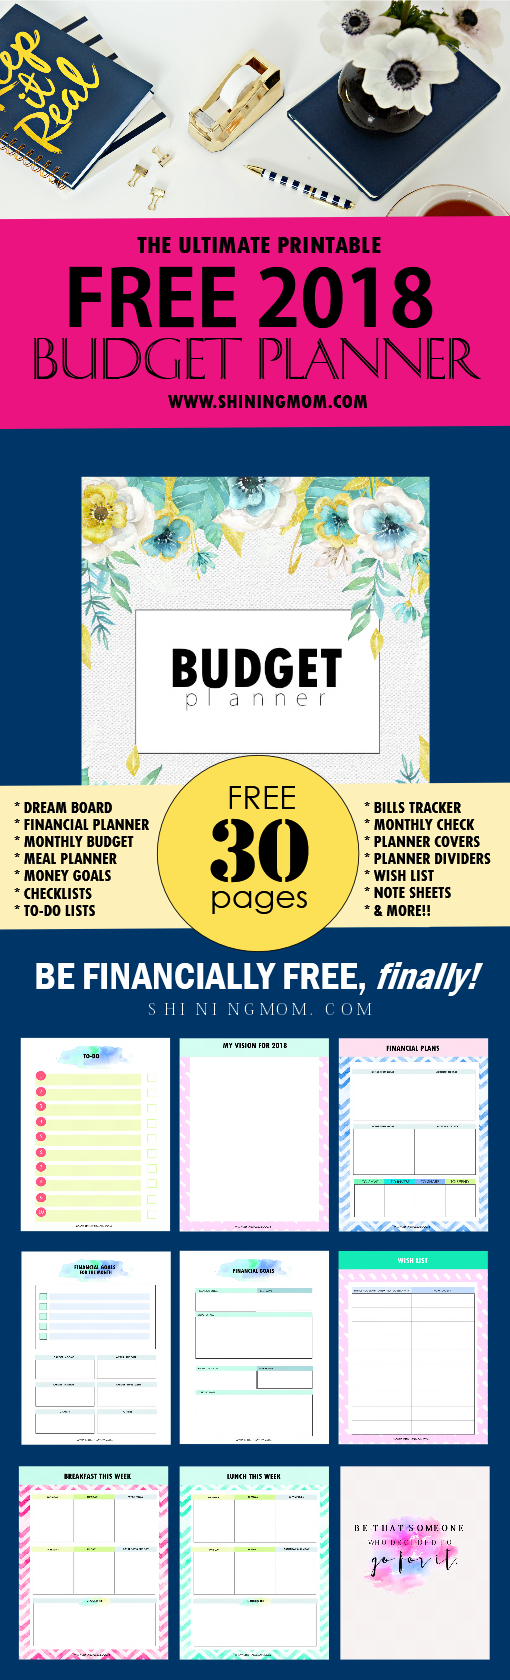 The Ultimate Free Printable 2018 Budget Planner You Need! - Free Printable Financial Planner 2017